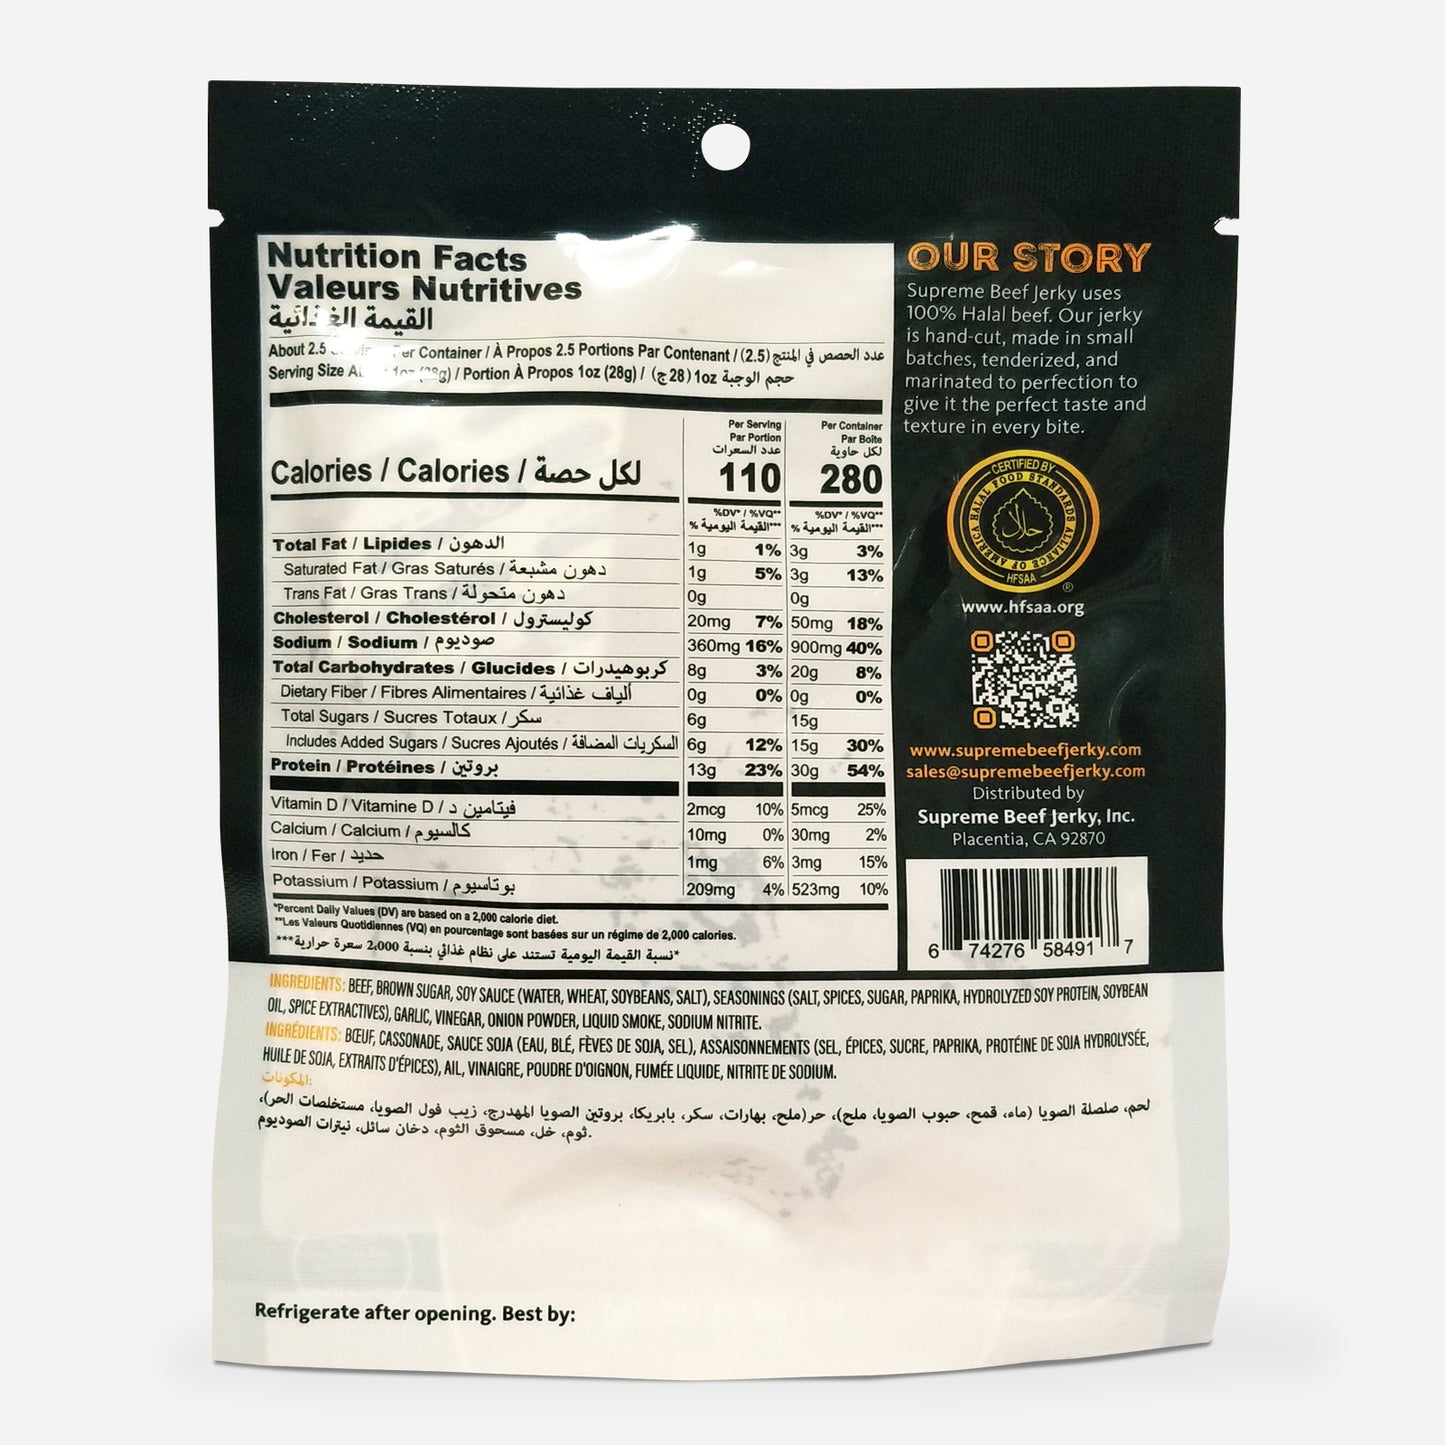 HALAL BEEF JERKY, MARINATED SWEET AND SPICY BEEF JERKY, HANDCRAFTED GOURMET MEAT SNACKS, 2.5 OZ (SWEET AND SPICY)